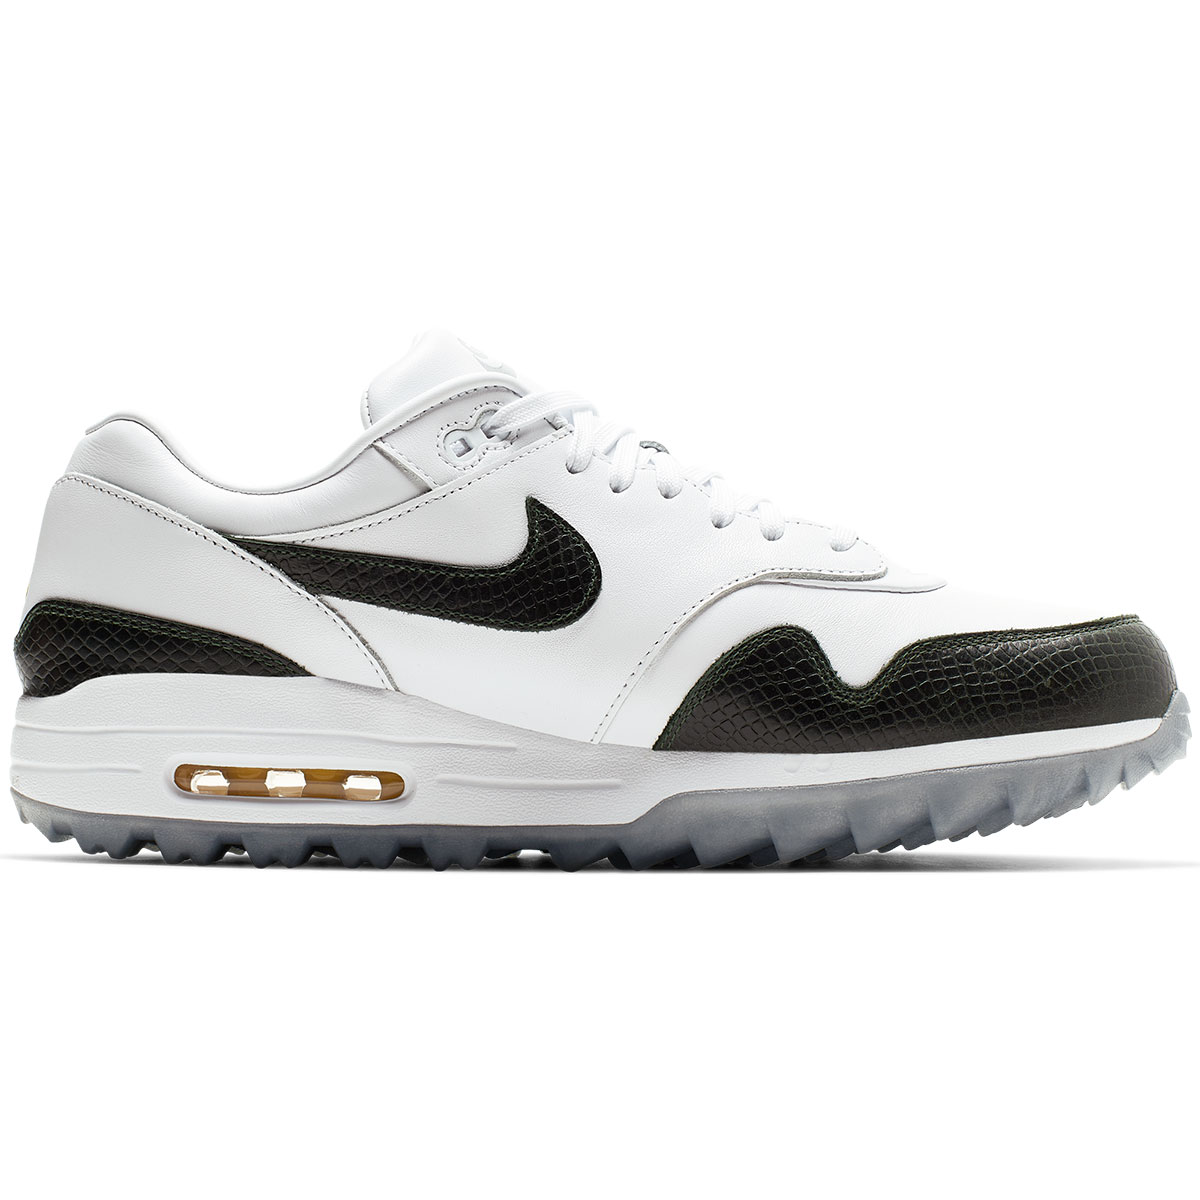 Nike Golf Air Max 1G NRG Shoes from 